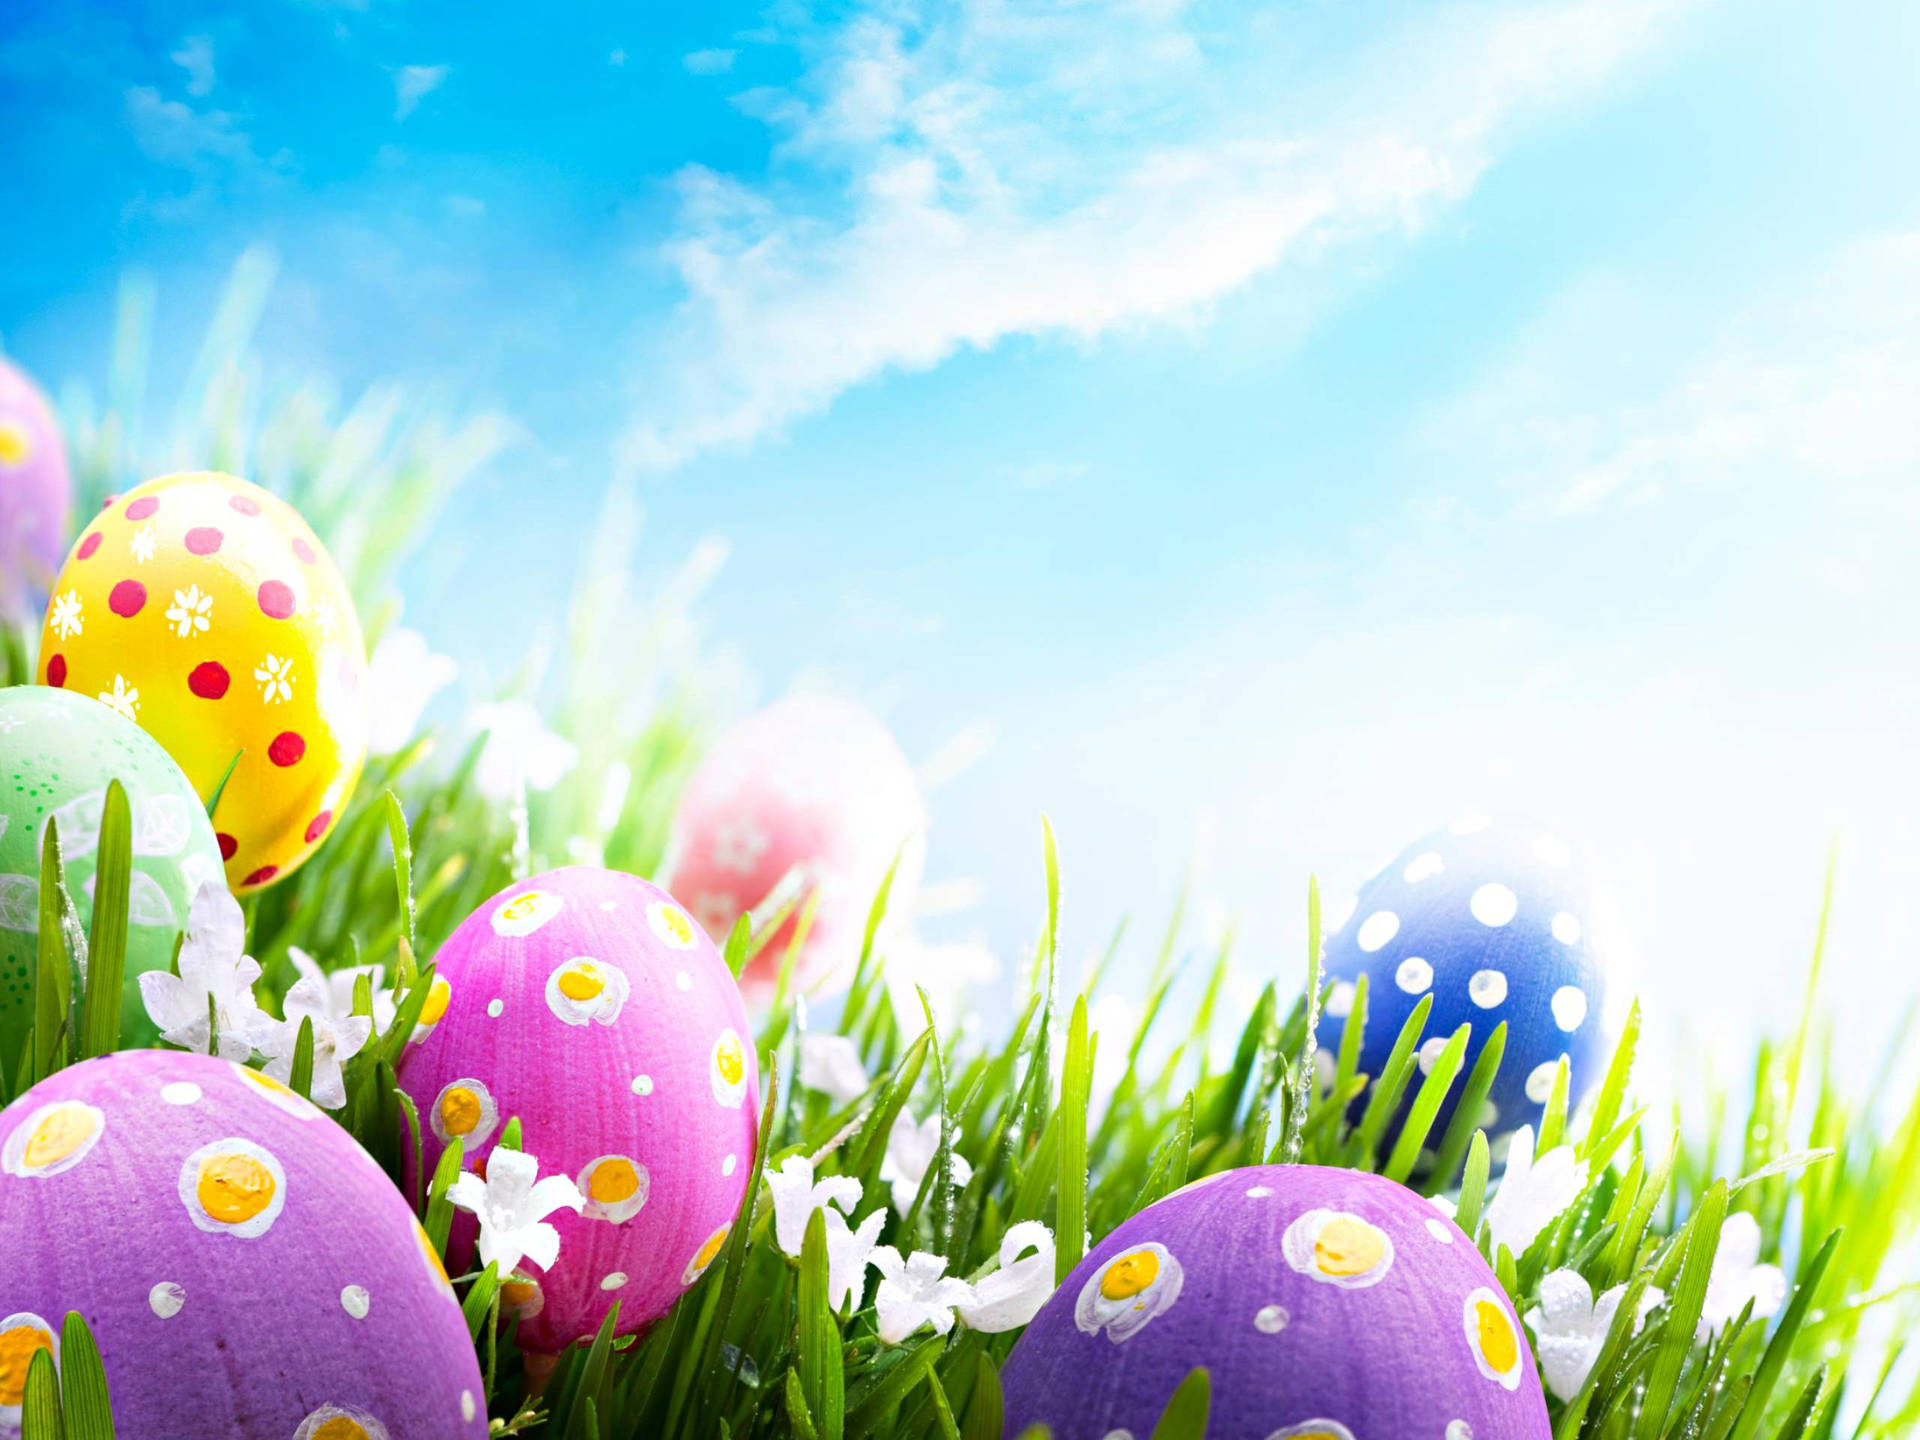 Happy Easter Eggs With Cloud Scenery And Grass Background